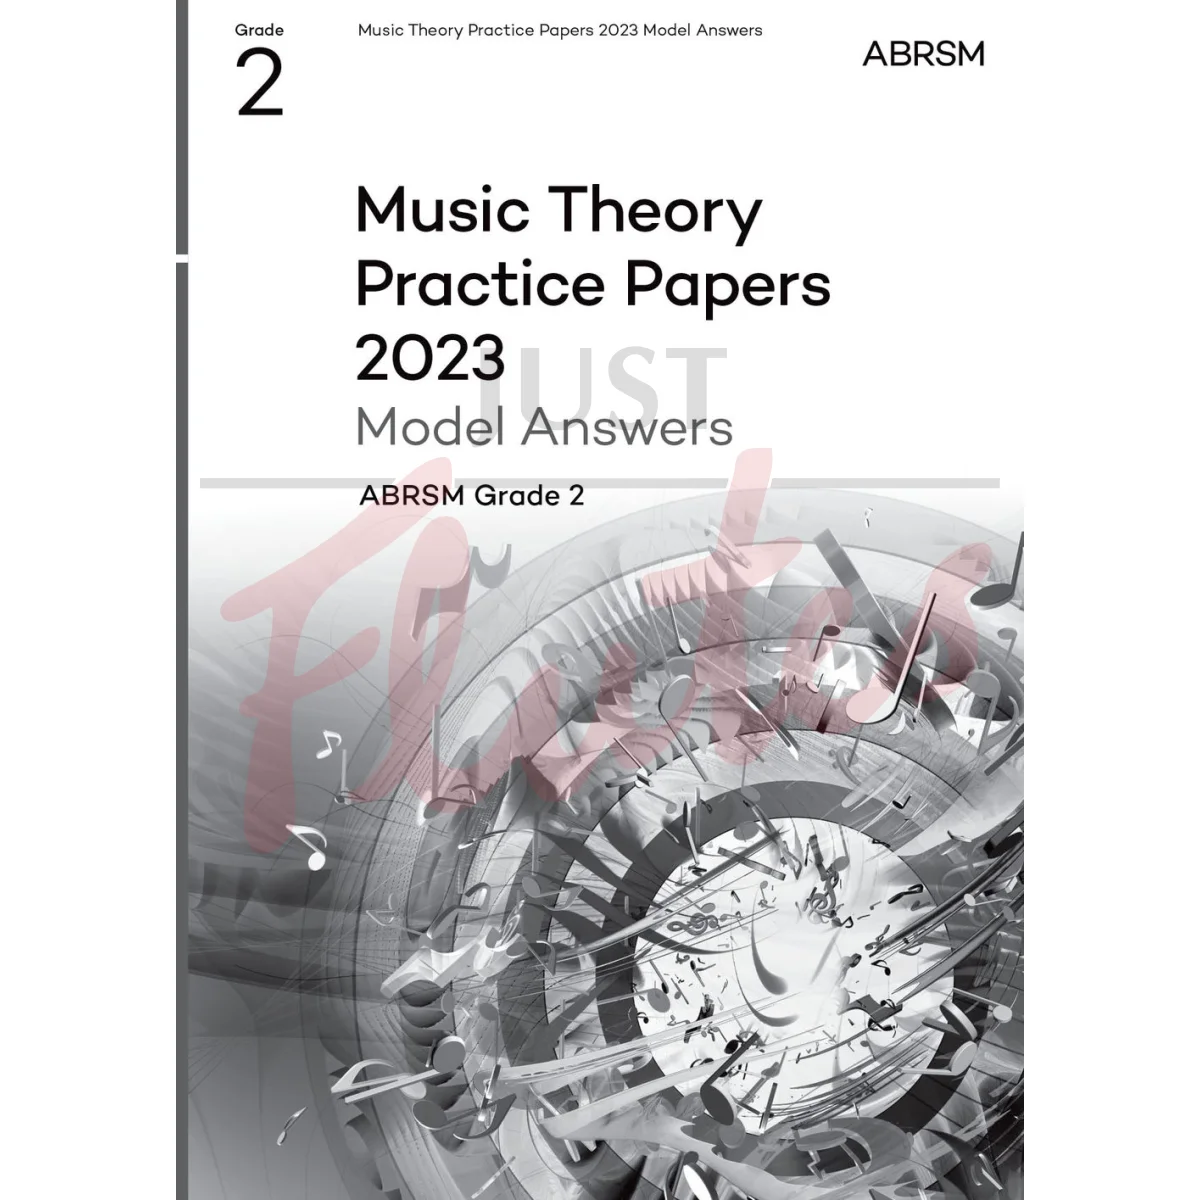 Music Theory Practice Papers 2023 Grade 2 - Model Answers